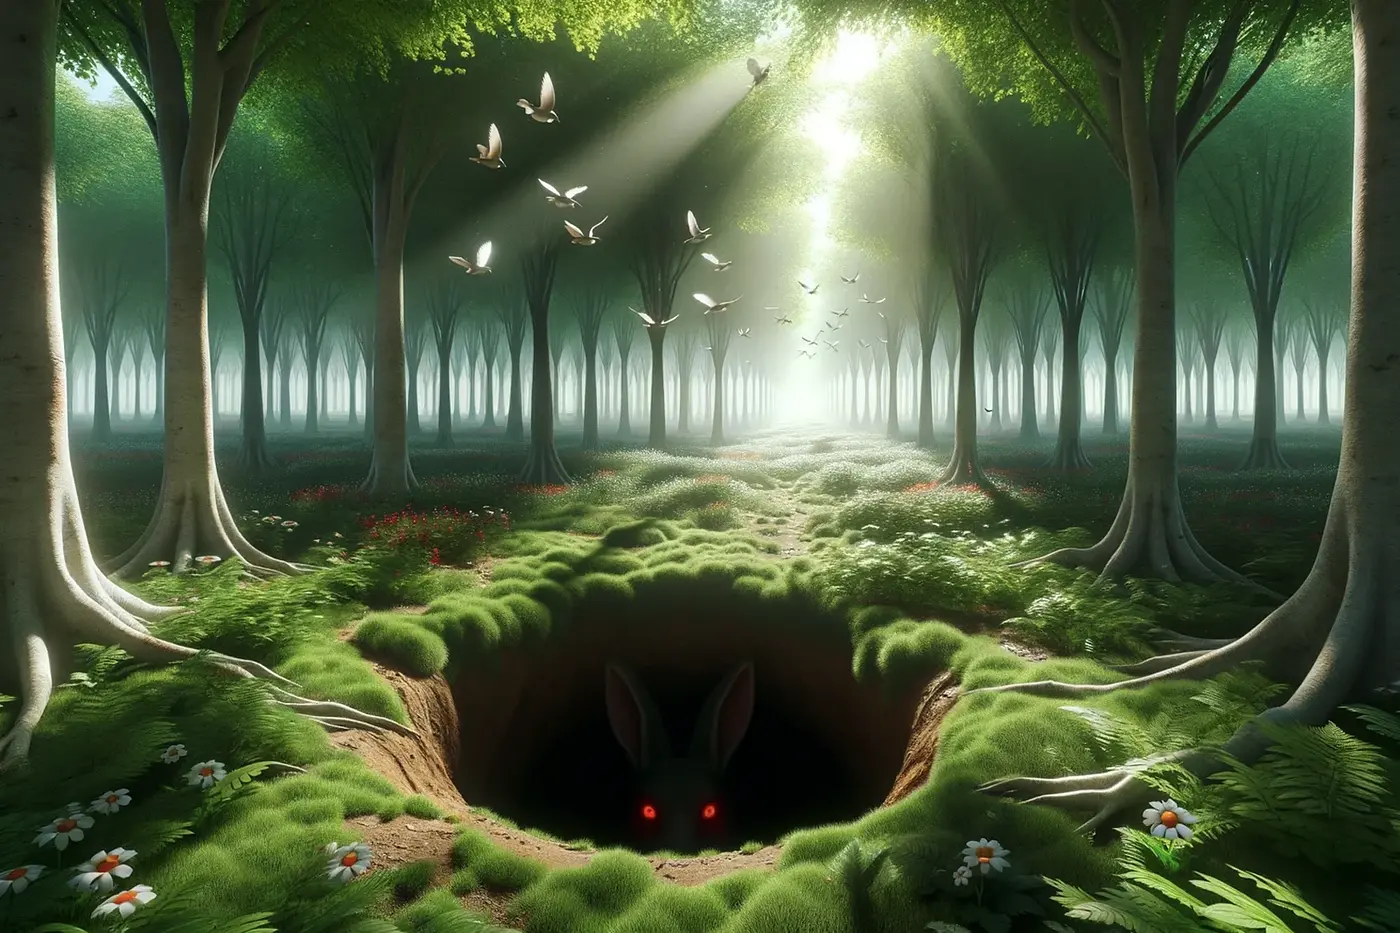 A creepy rabbit in its hole surrounded by a forrest with sunlight peeking through.